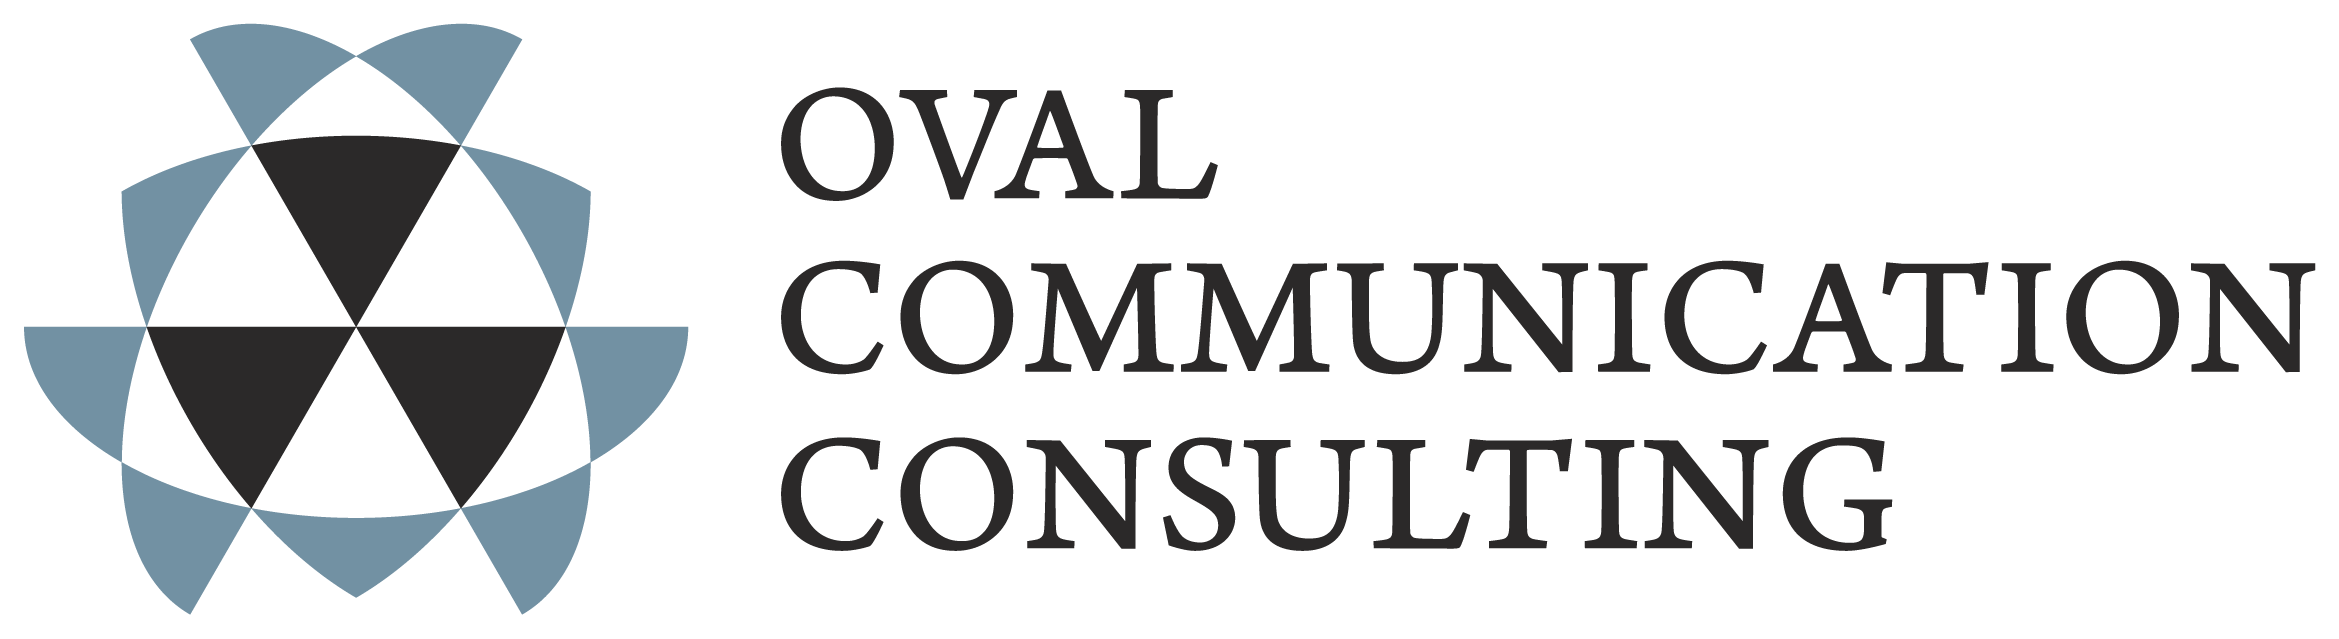 OVAL COMMUNICATION CONSULTING